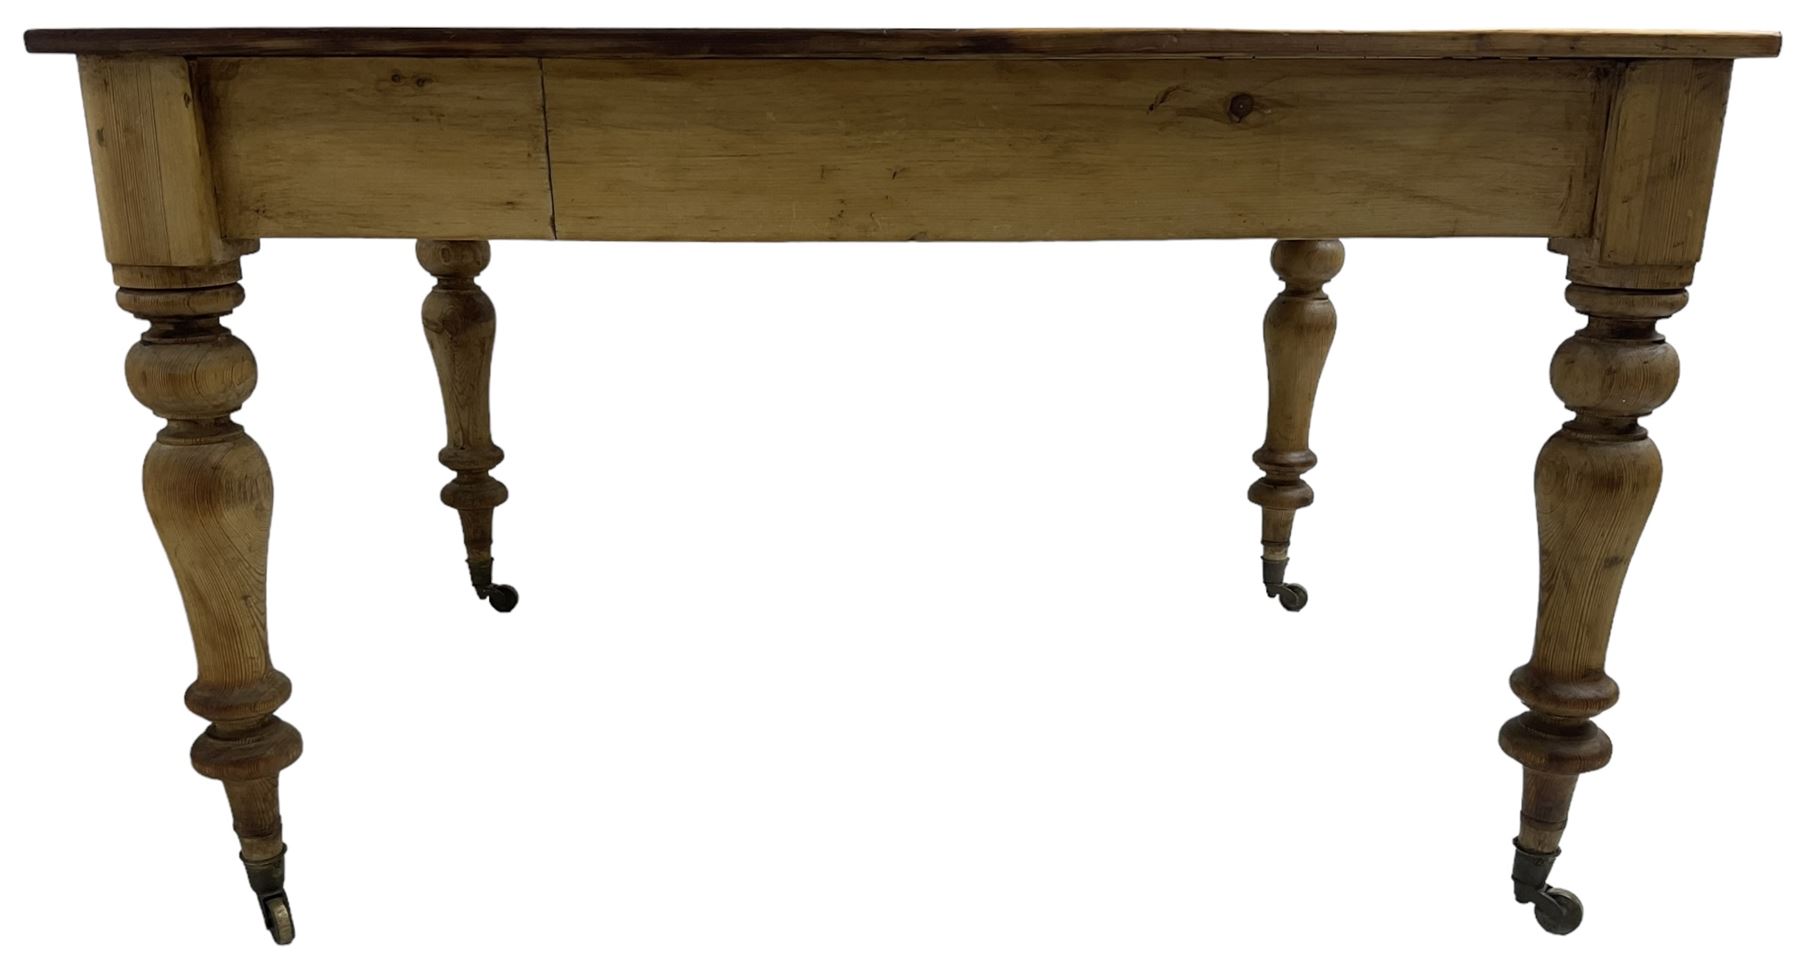 Victorian pine farmhouse kitchen dining table - Image 2 of 8